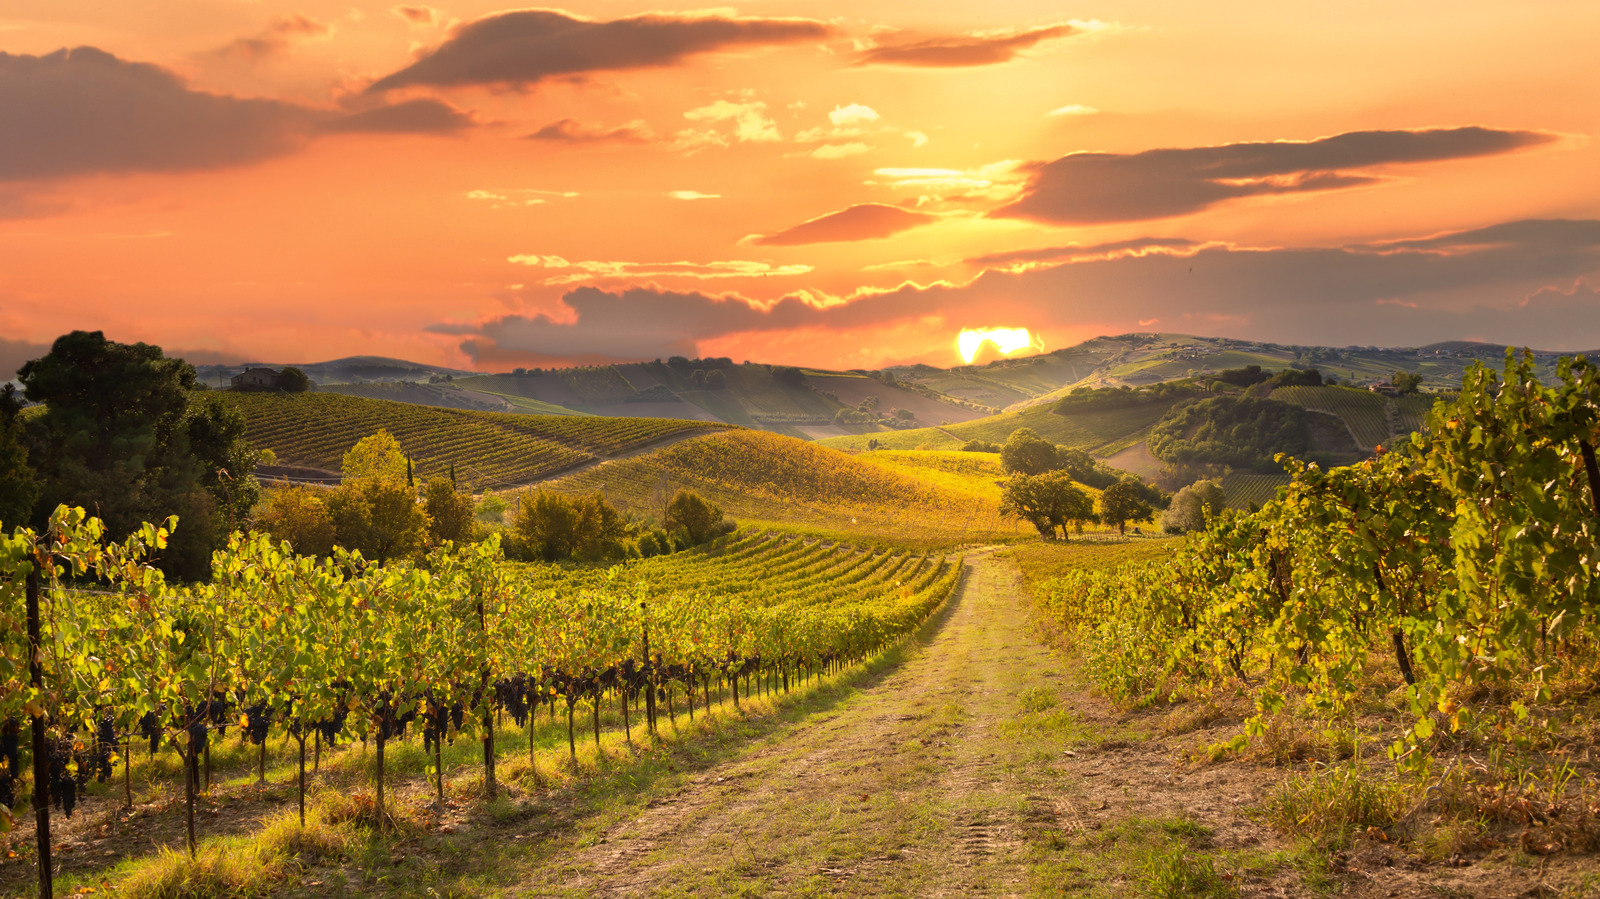 california wine tour vacation packages